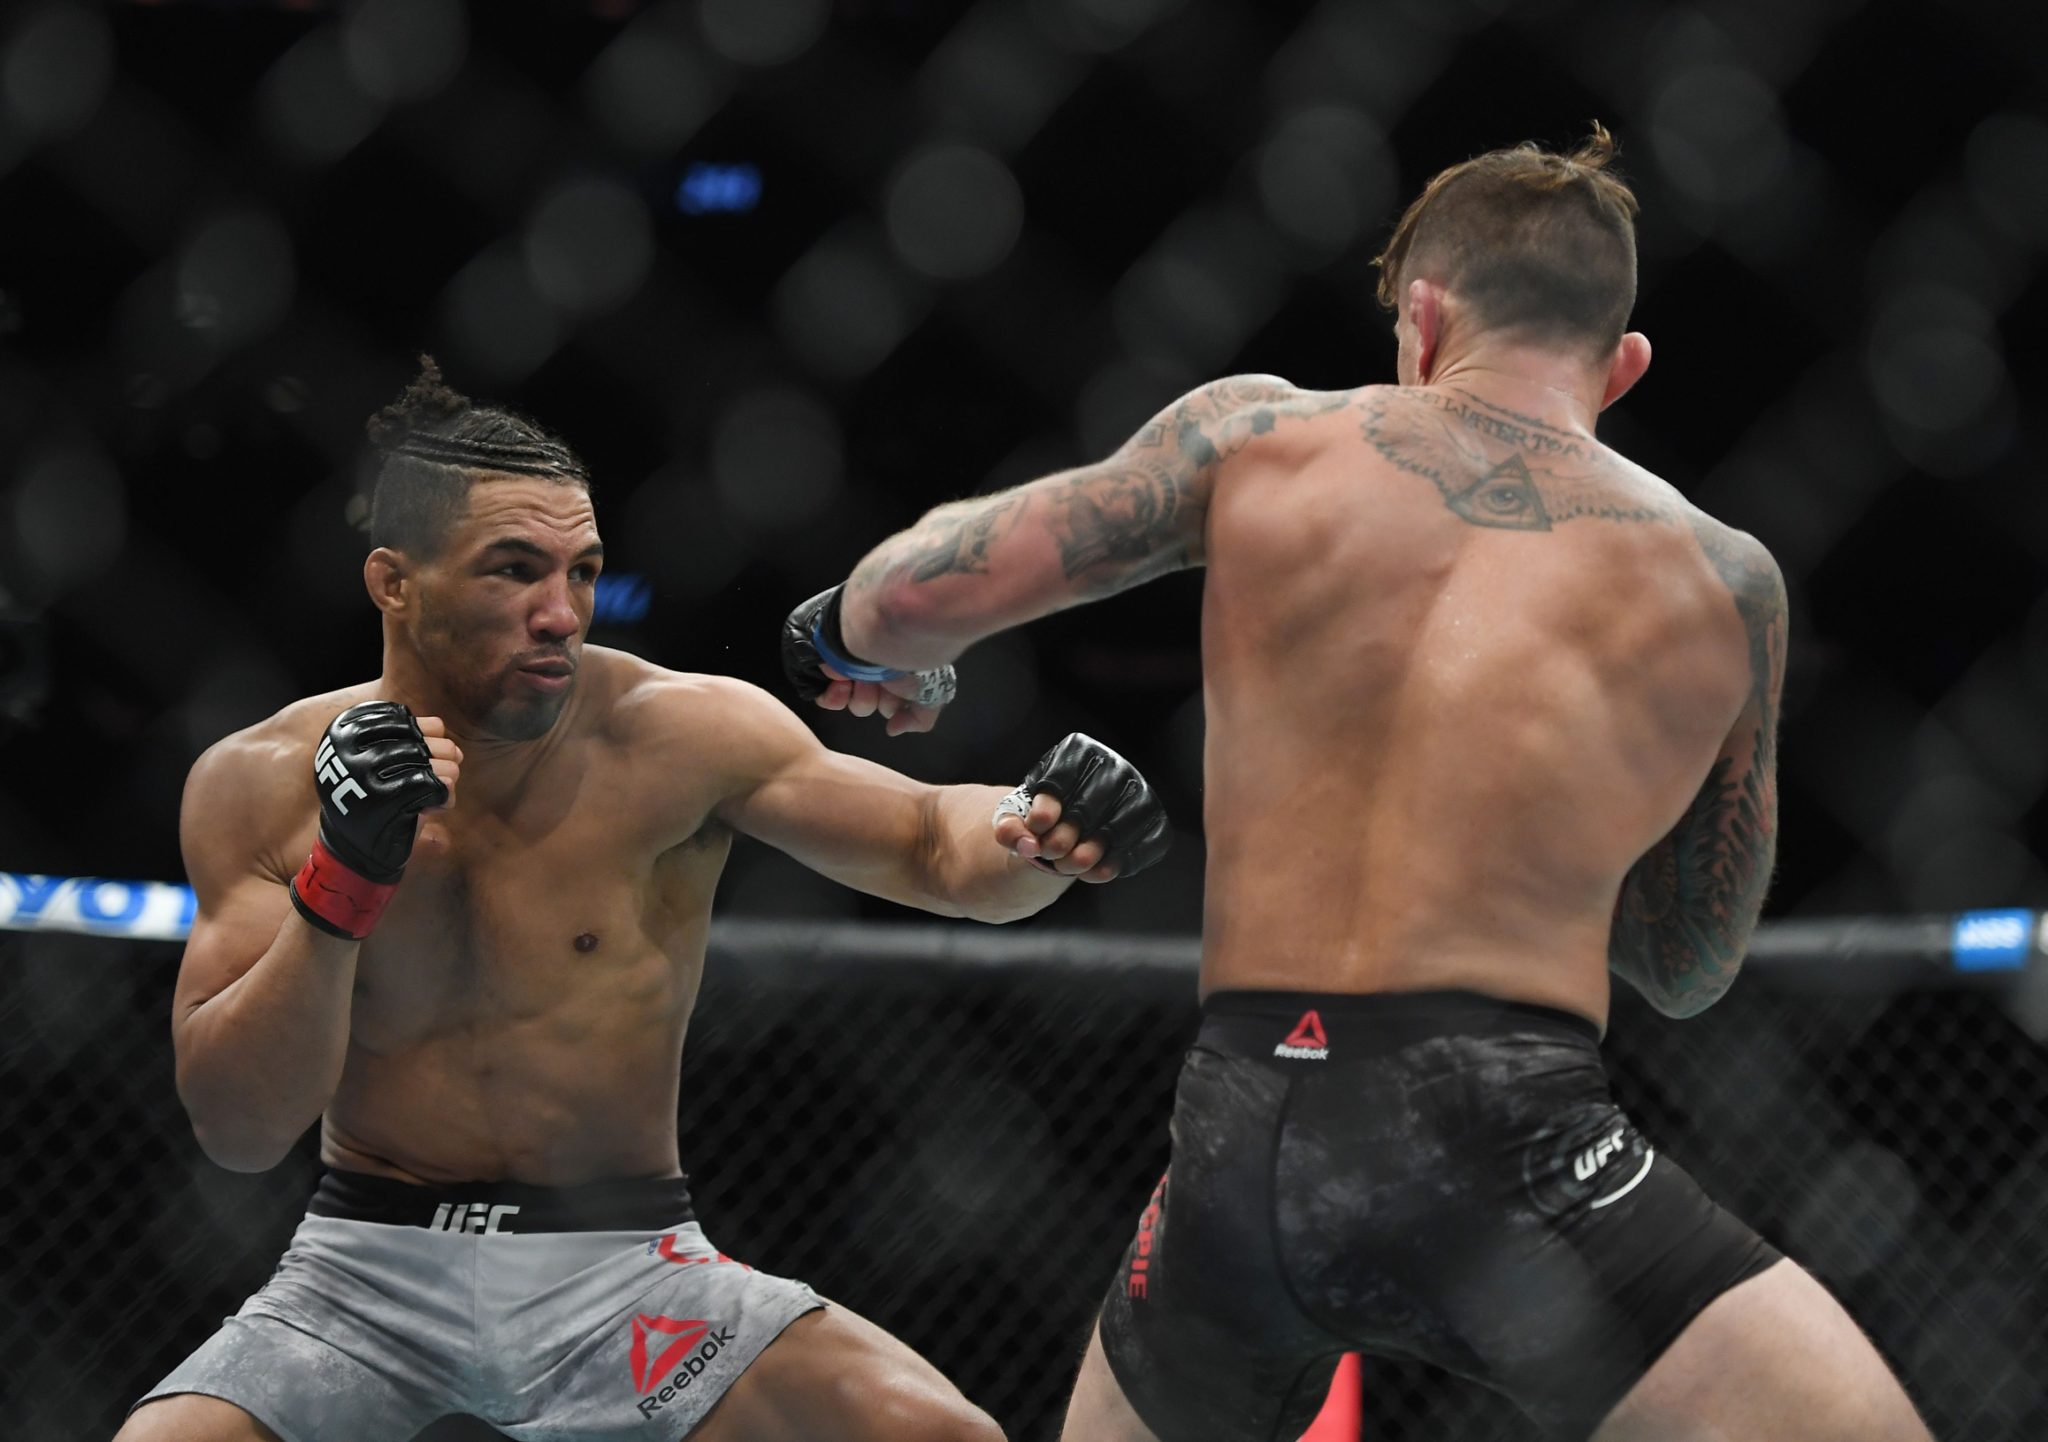 UFC Fights Will Take Place, Most Without Fans, Despite Coronavirus Concerns